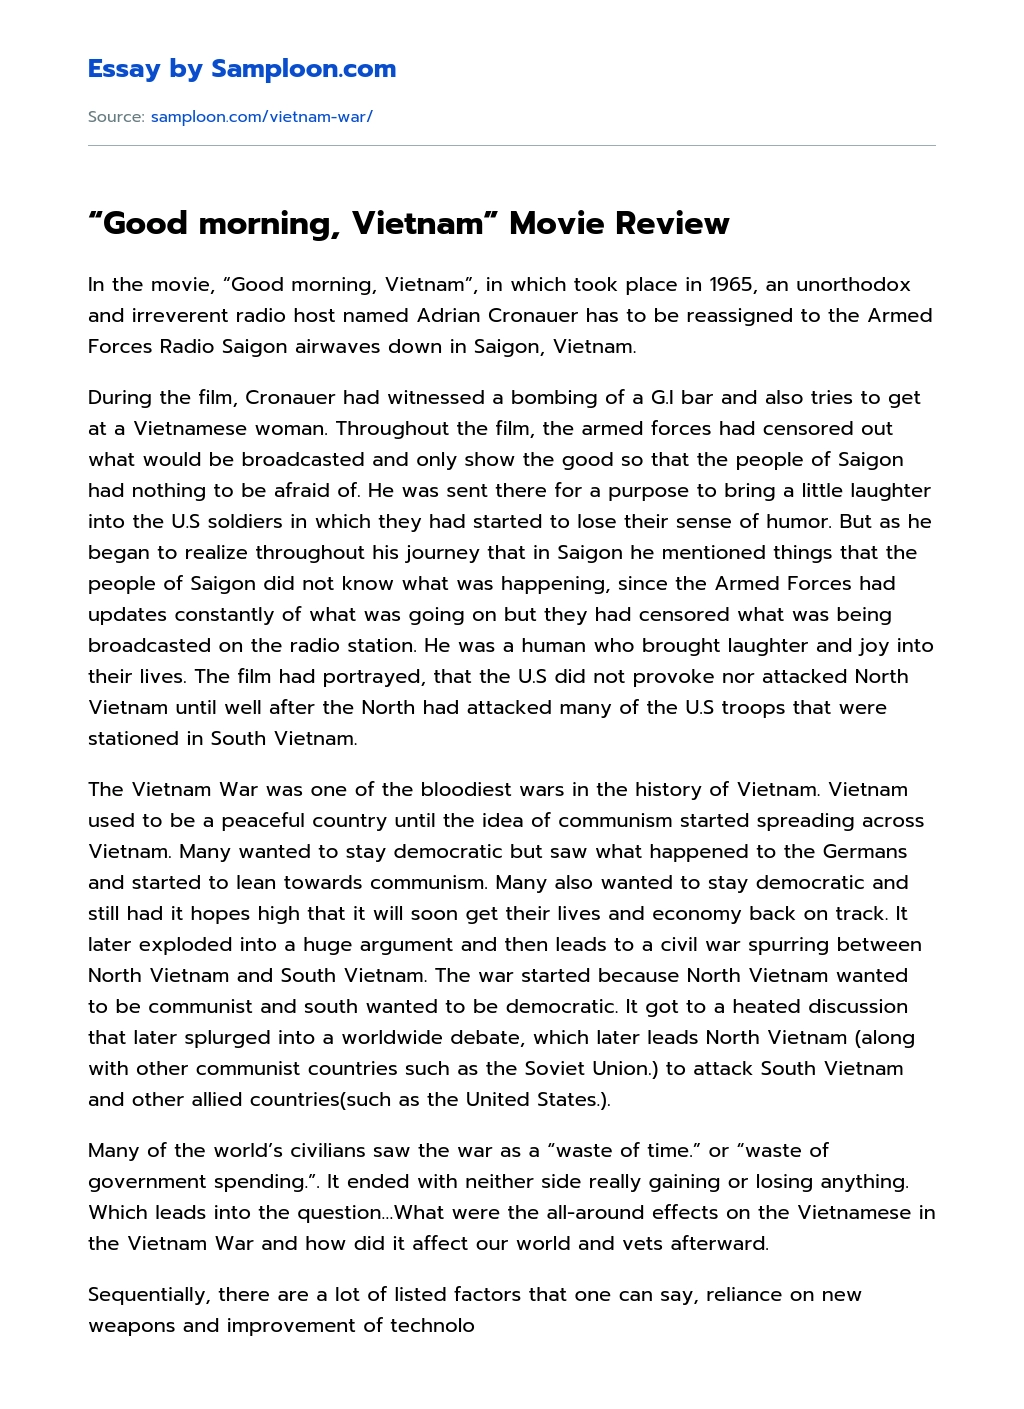 “Good morning, Vietnam” Movie Review Character Analysis essay